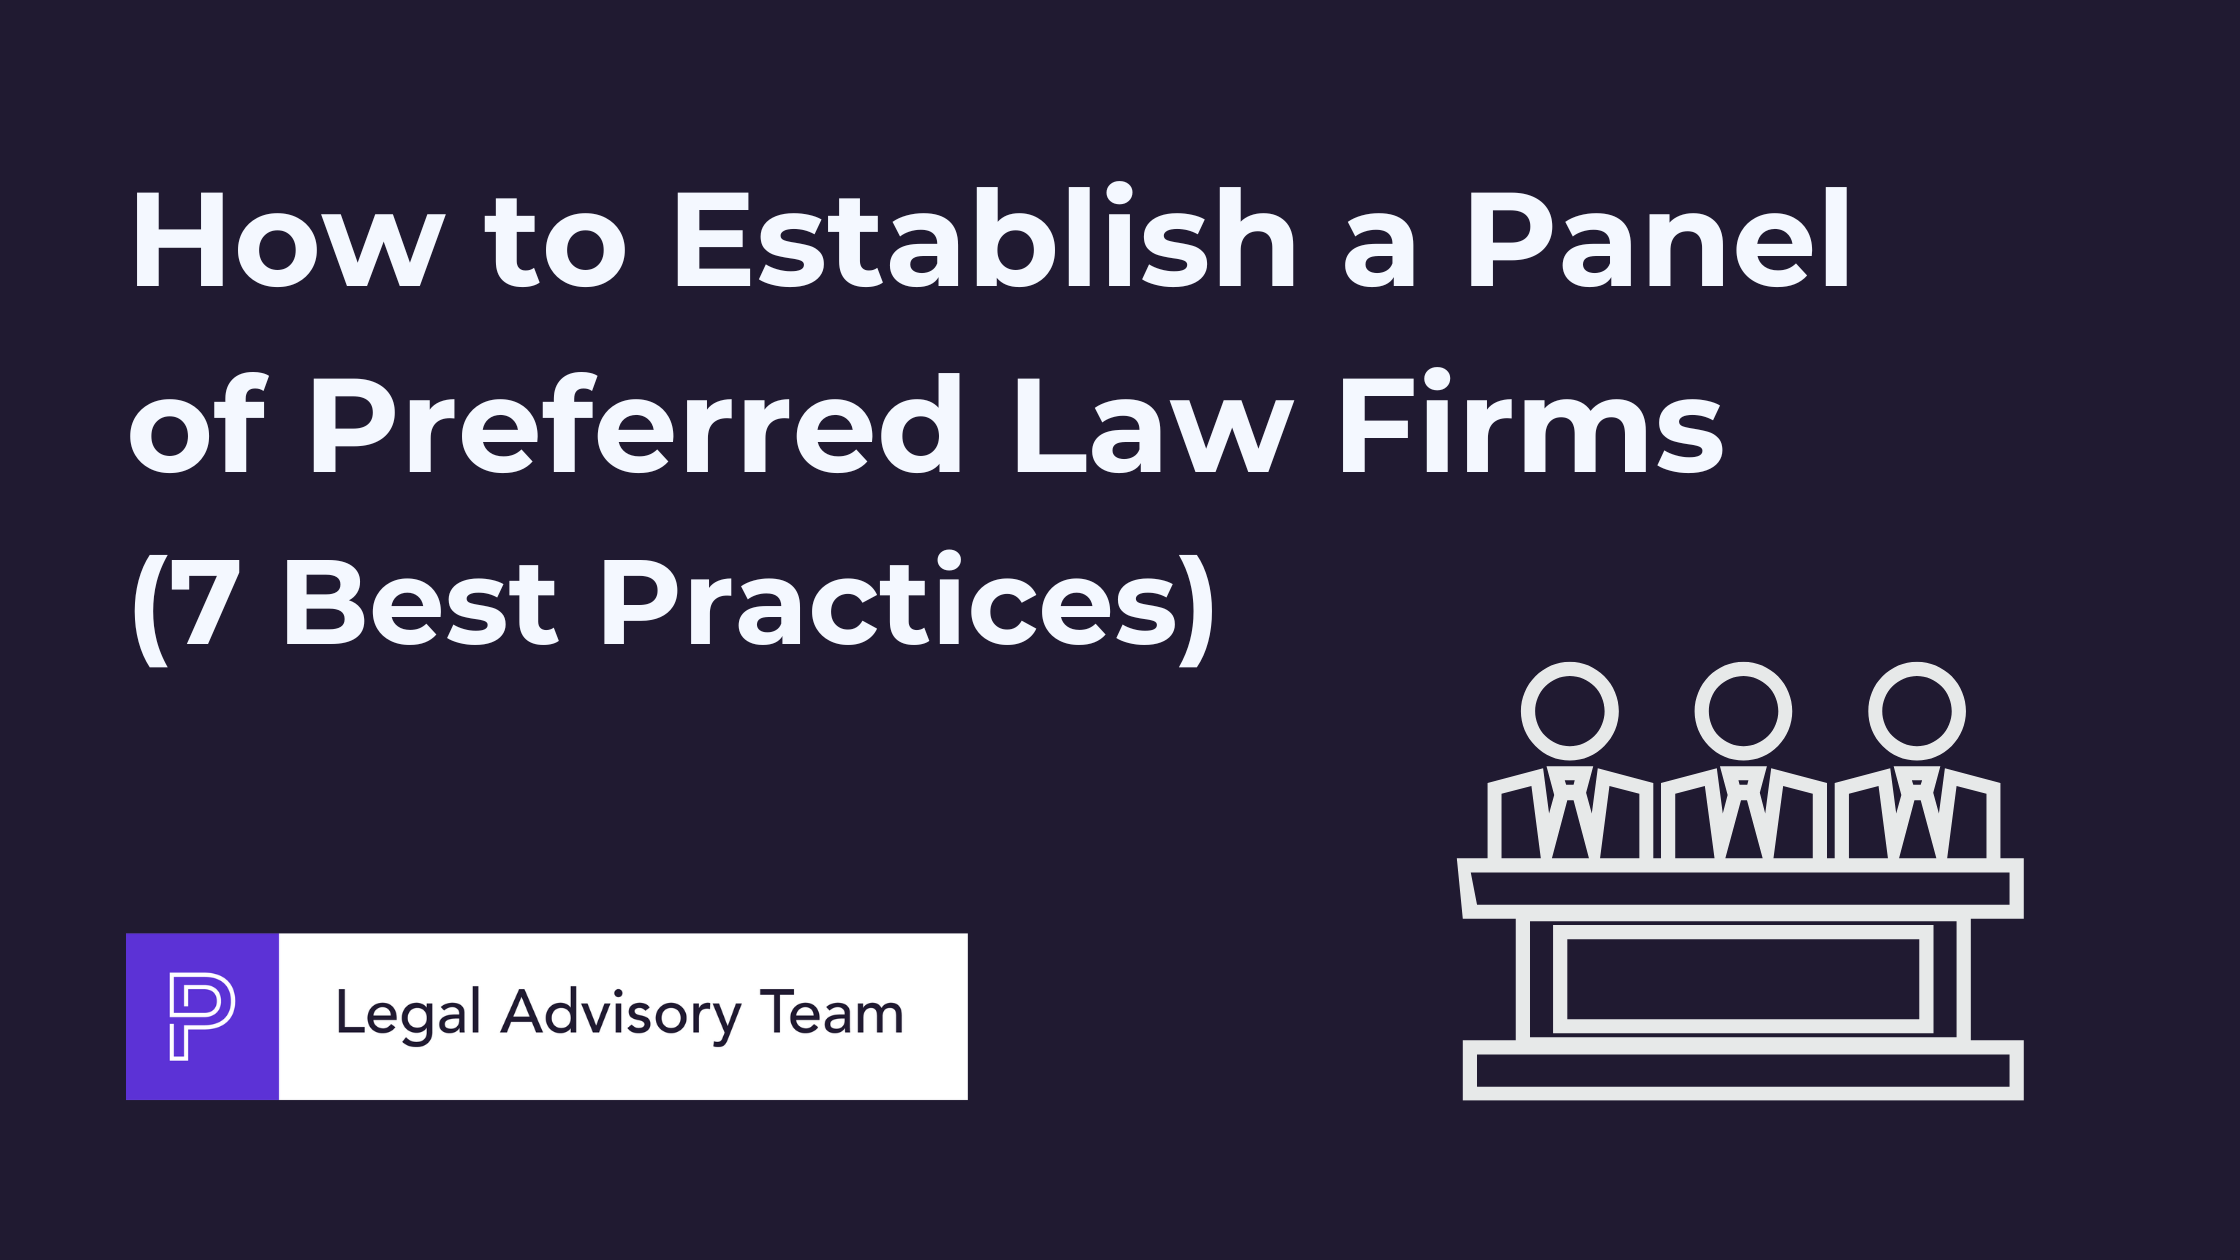 How to establish a panel of preferred law firms